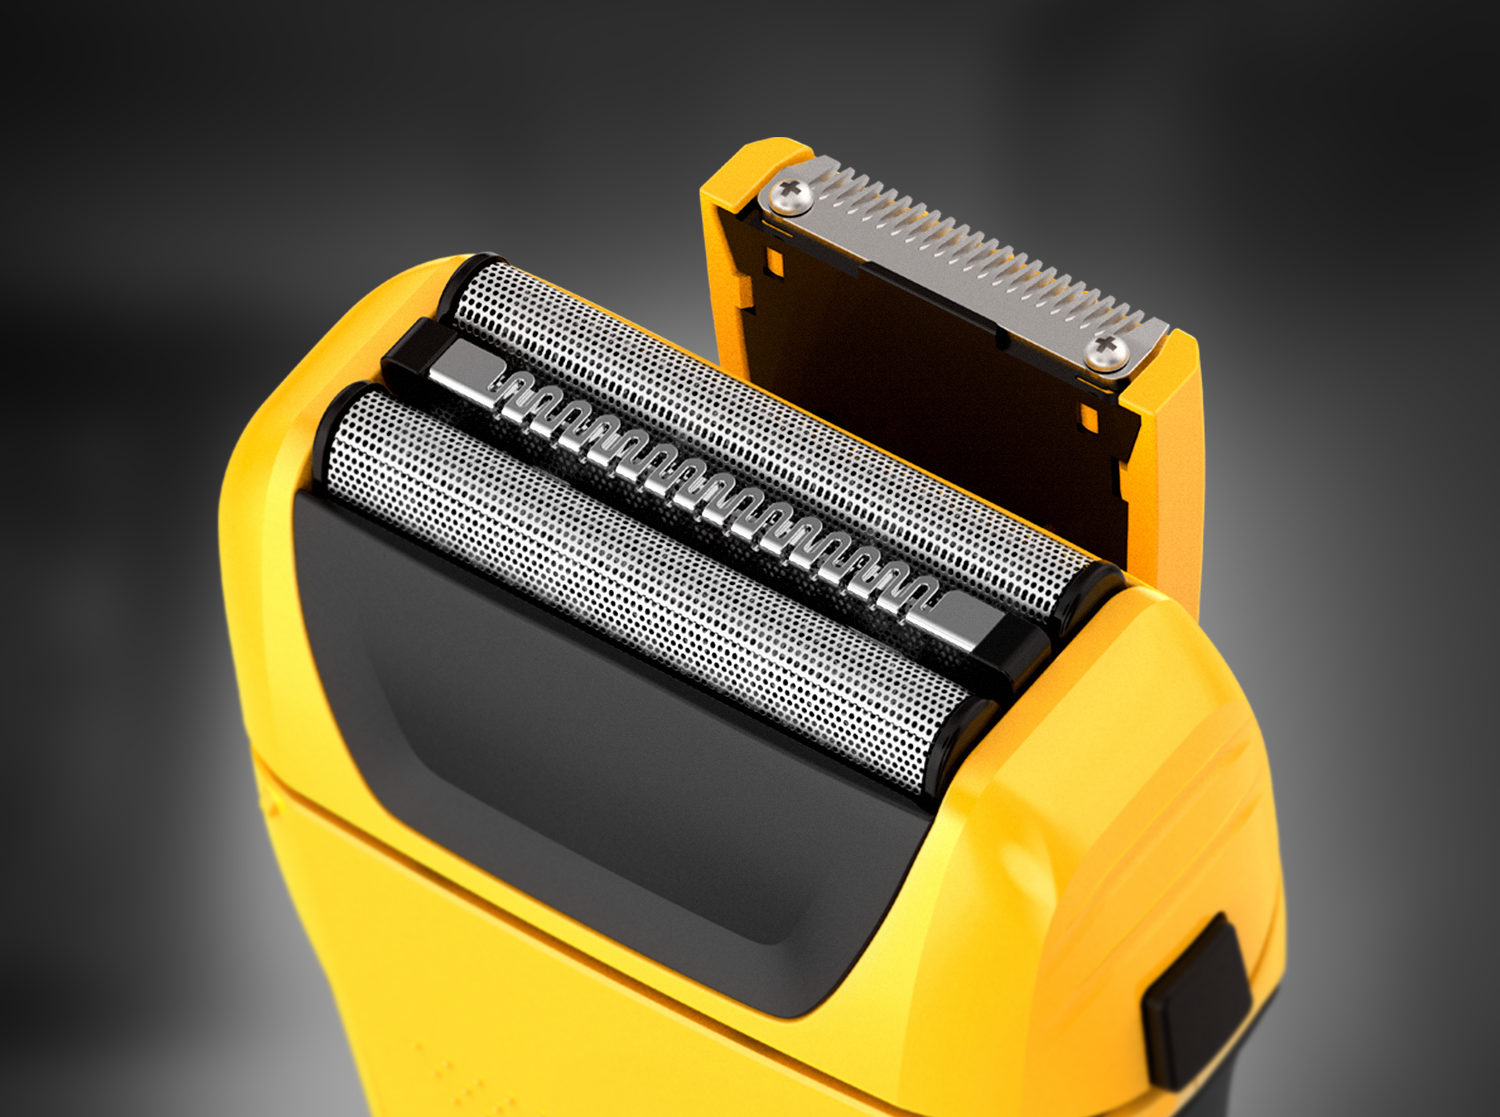 Wahl Lifeproof Wet/Dry Electric Shavers